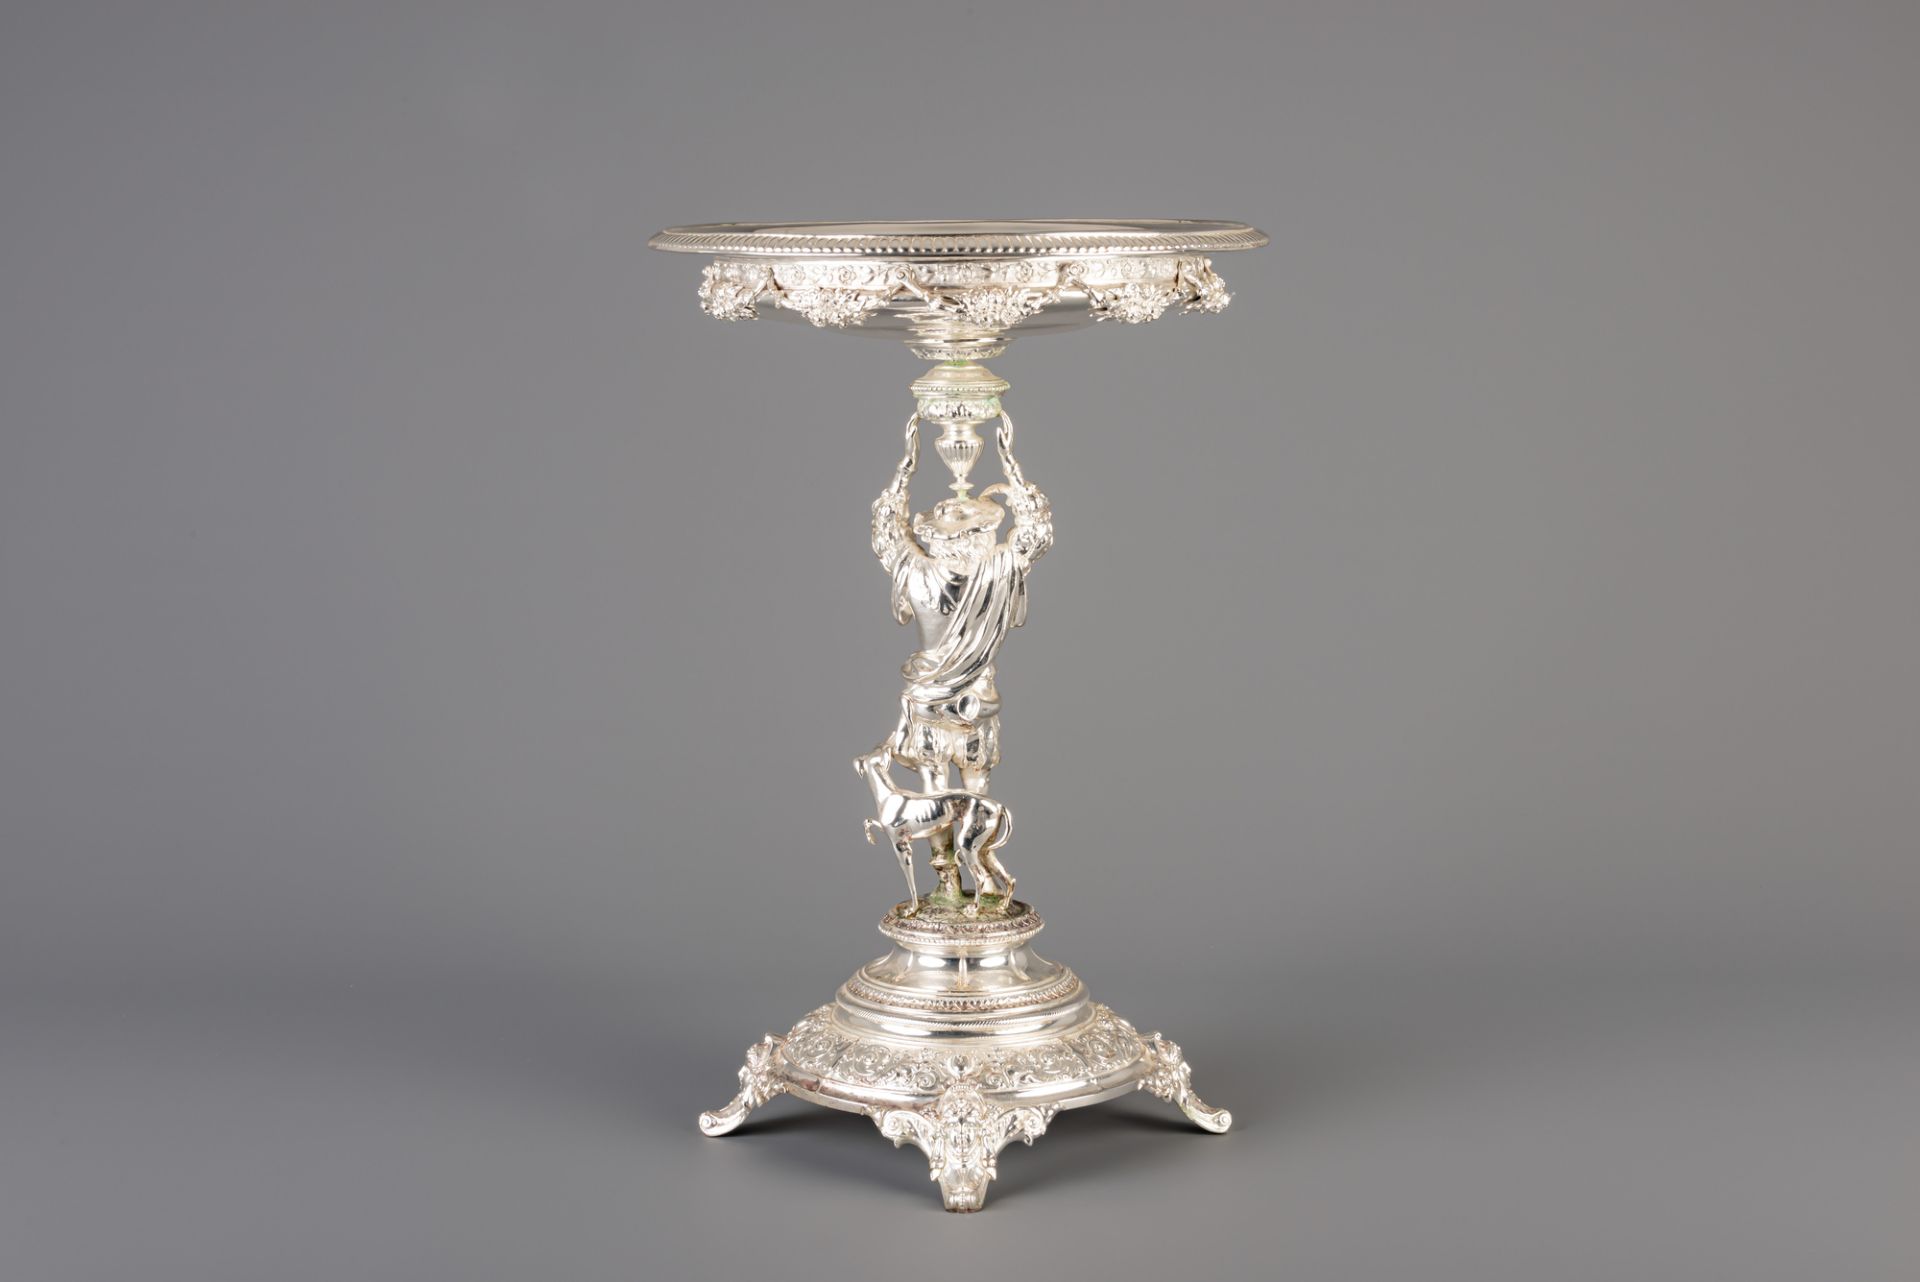 A German silver figural centrepiece with a nobleman and a greyhound during the hunt, 800/000, 19th C - Image 3 of 7